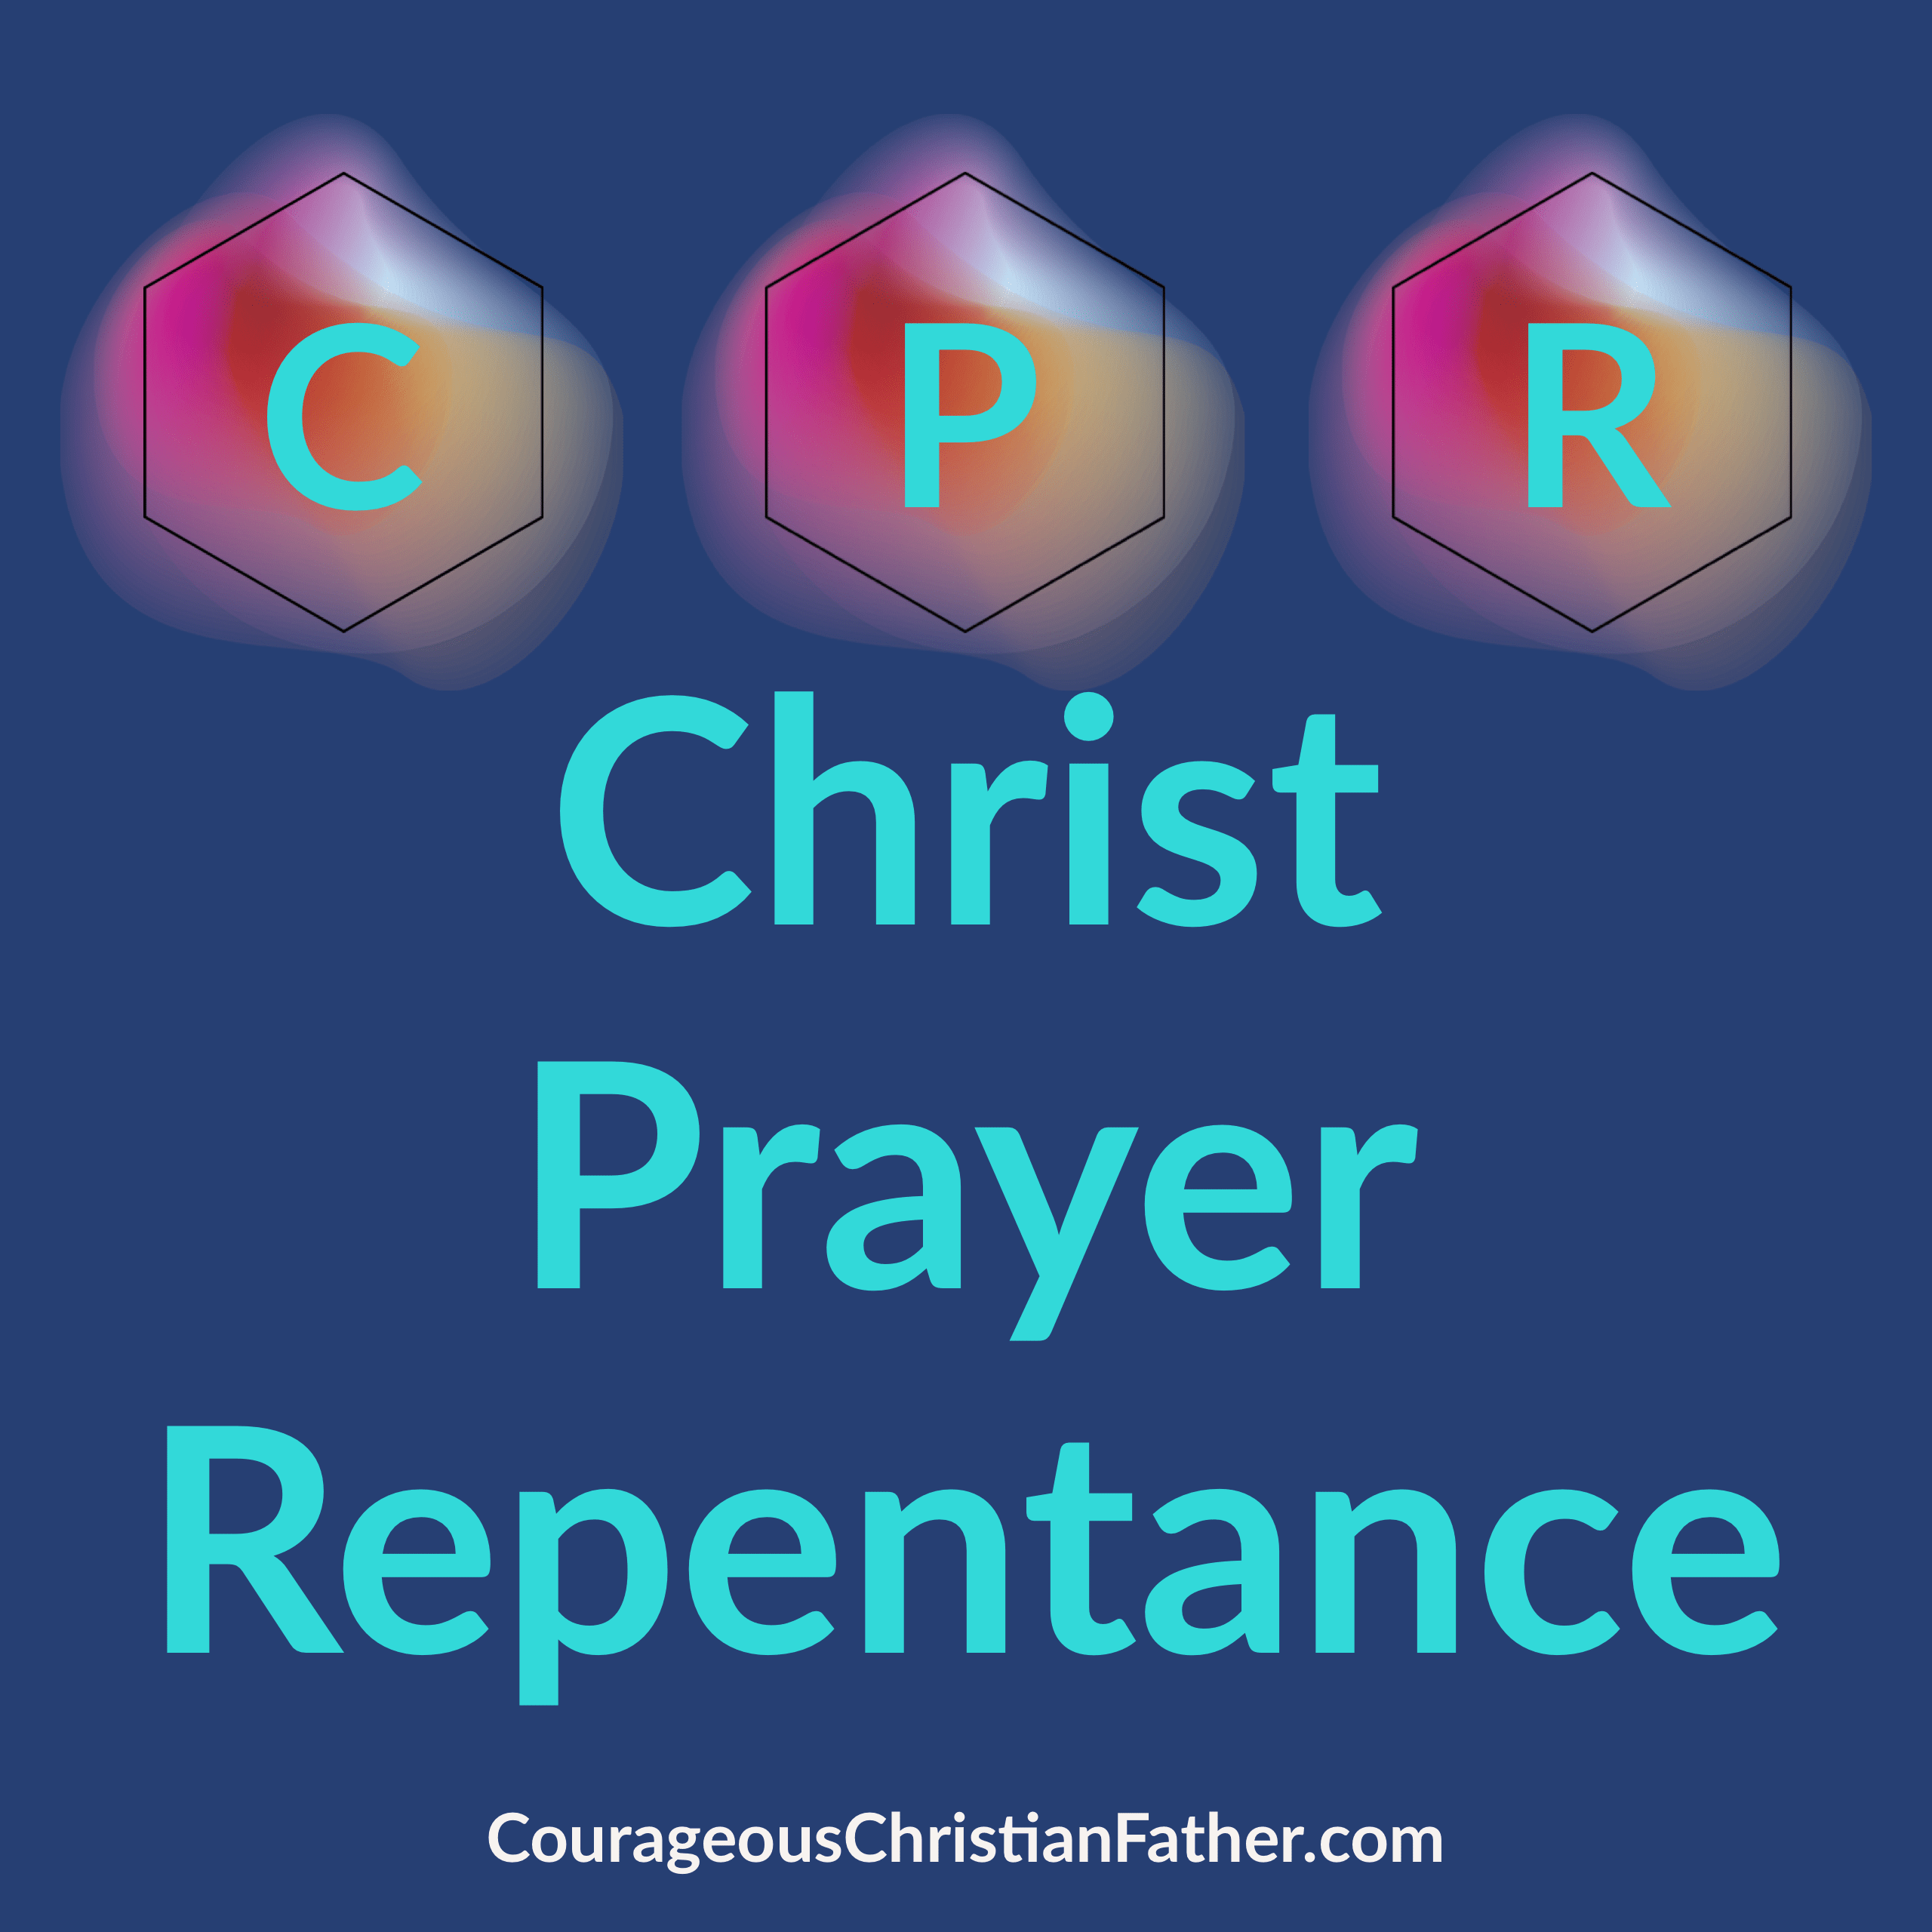 CPR acronym - a Christian acronym for CPR. #CPR